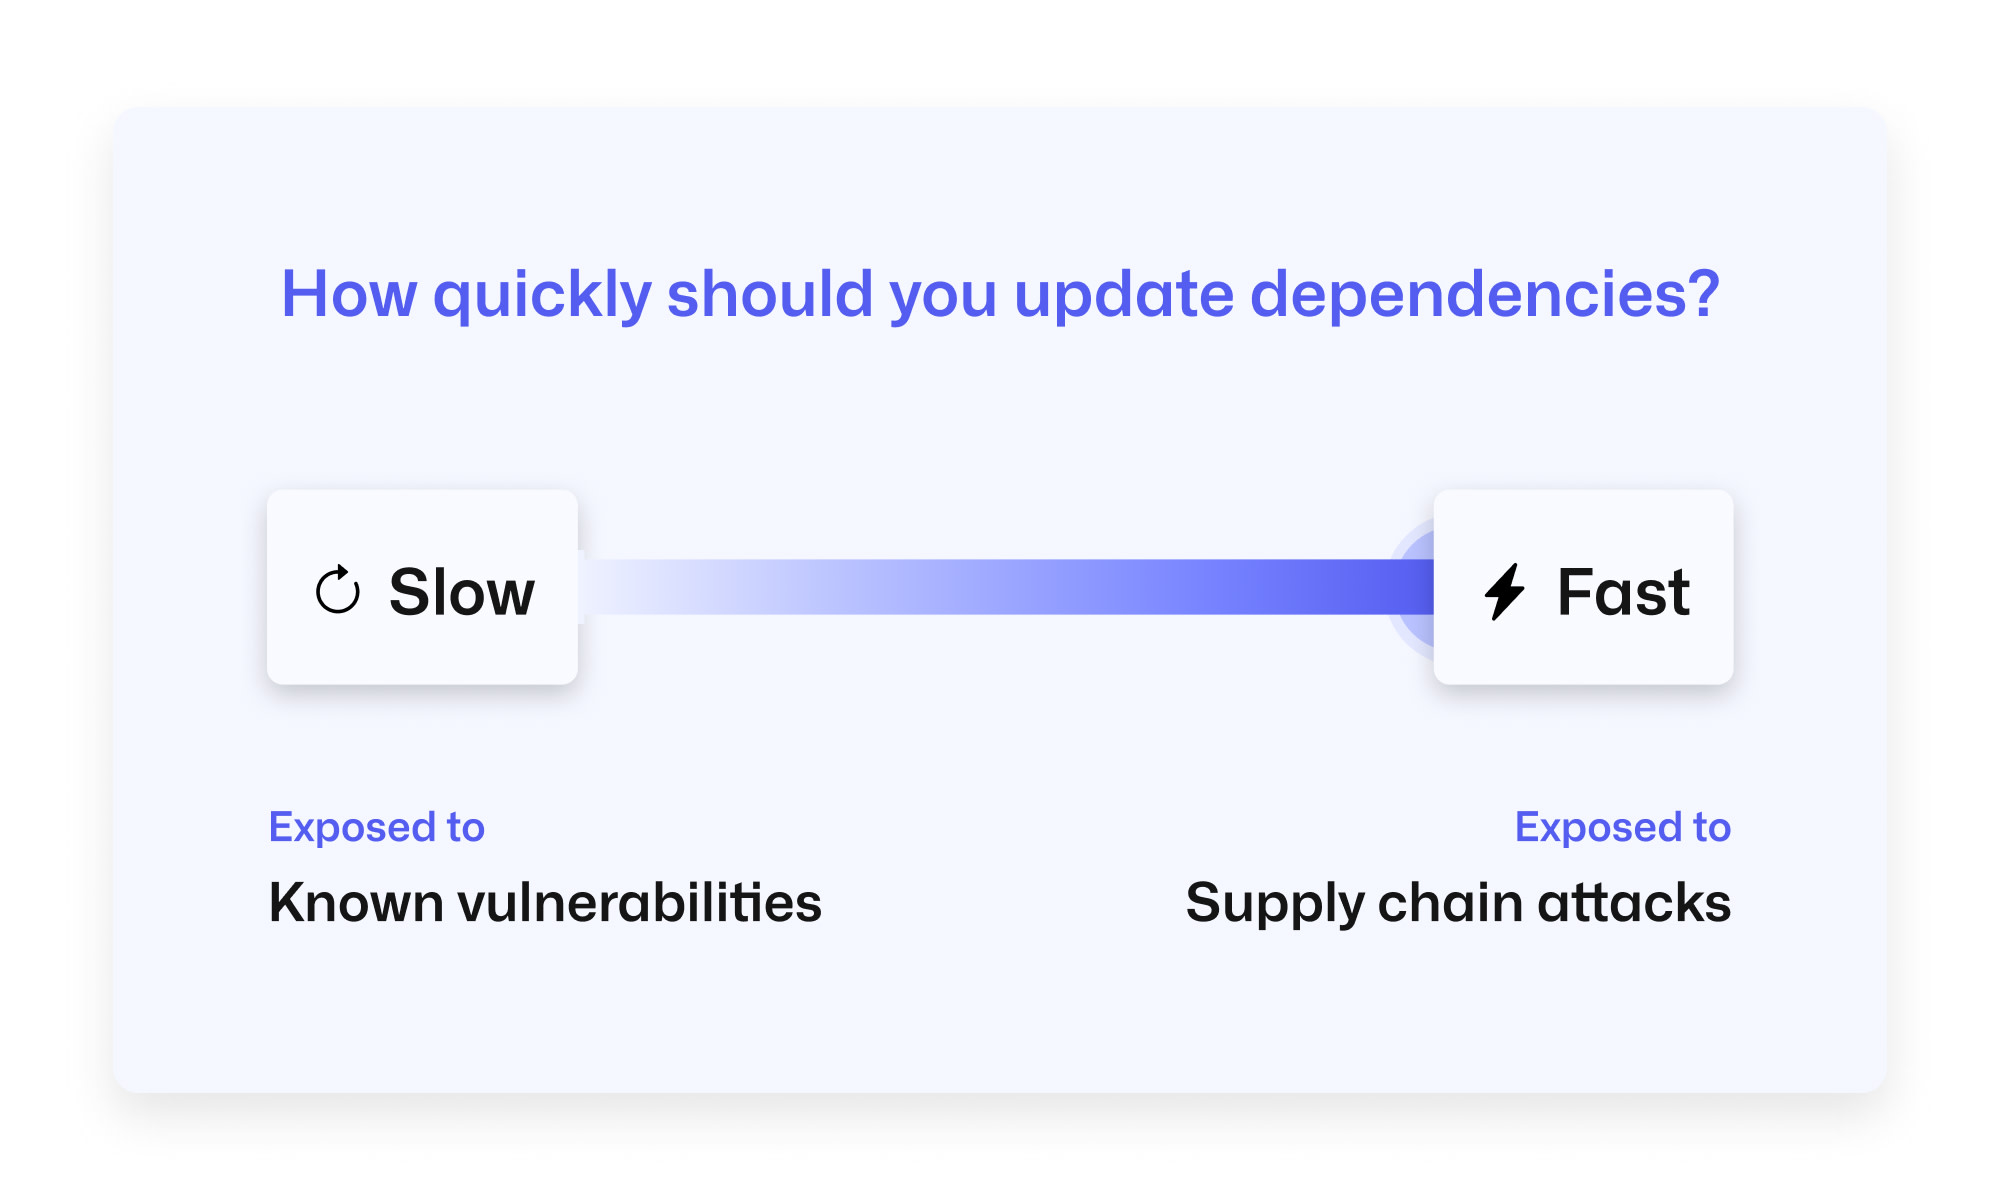 Spectrum asking how quickly you should update dependencies. On the far left is slow/exposed to known vulnerabilities. On the far right fast/exposed to supply chain attacks.